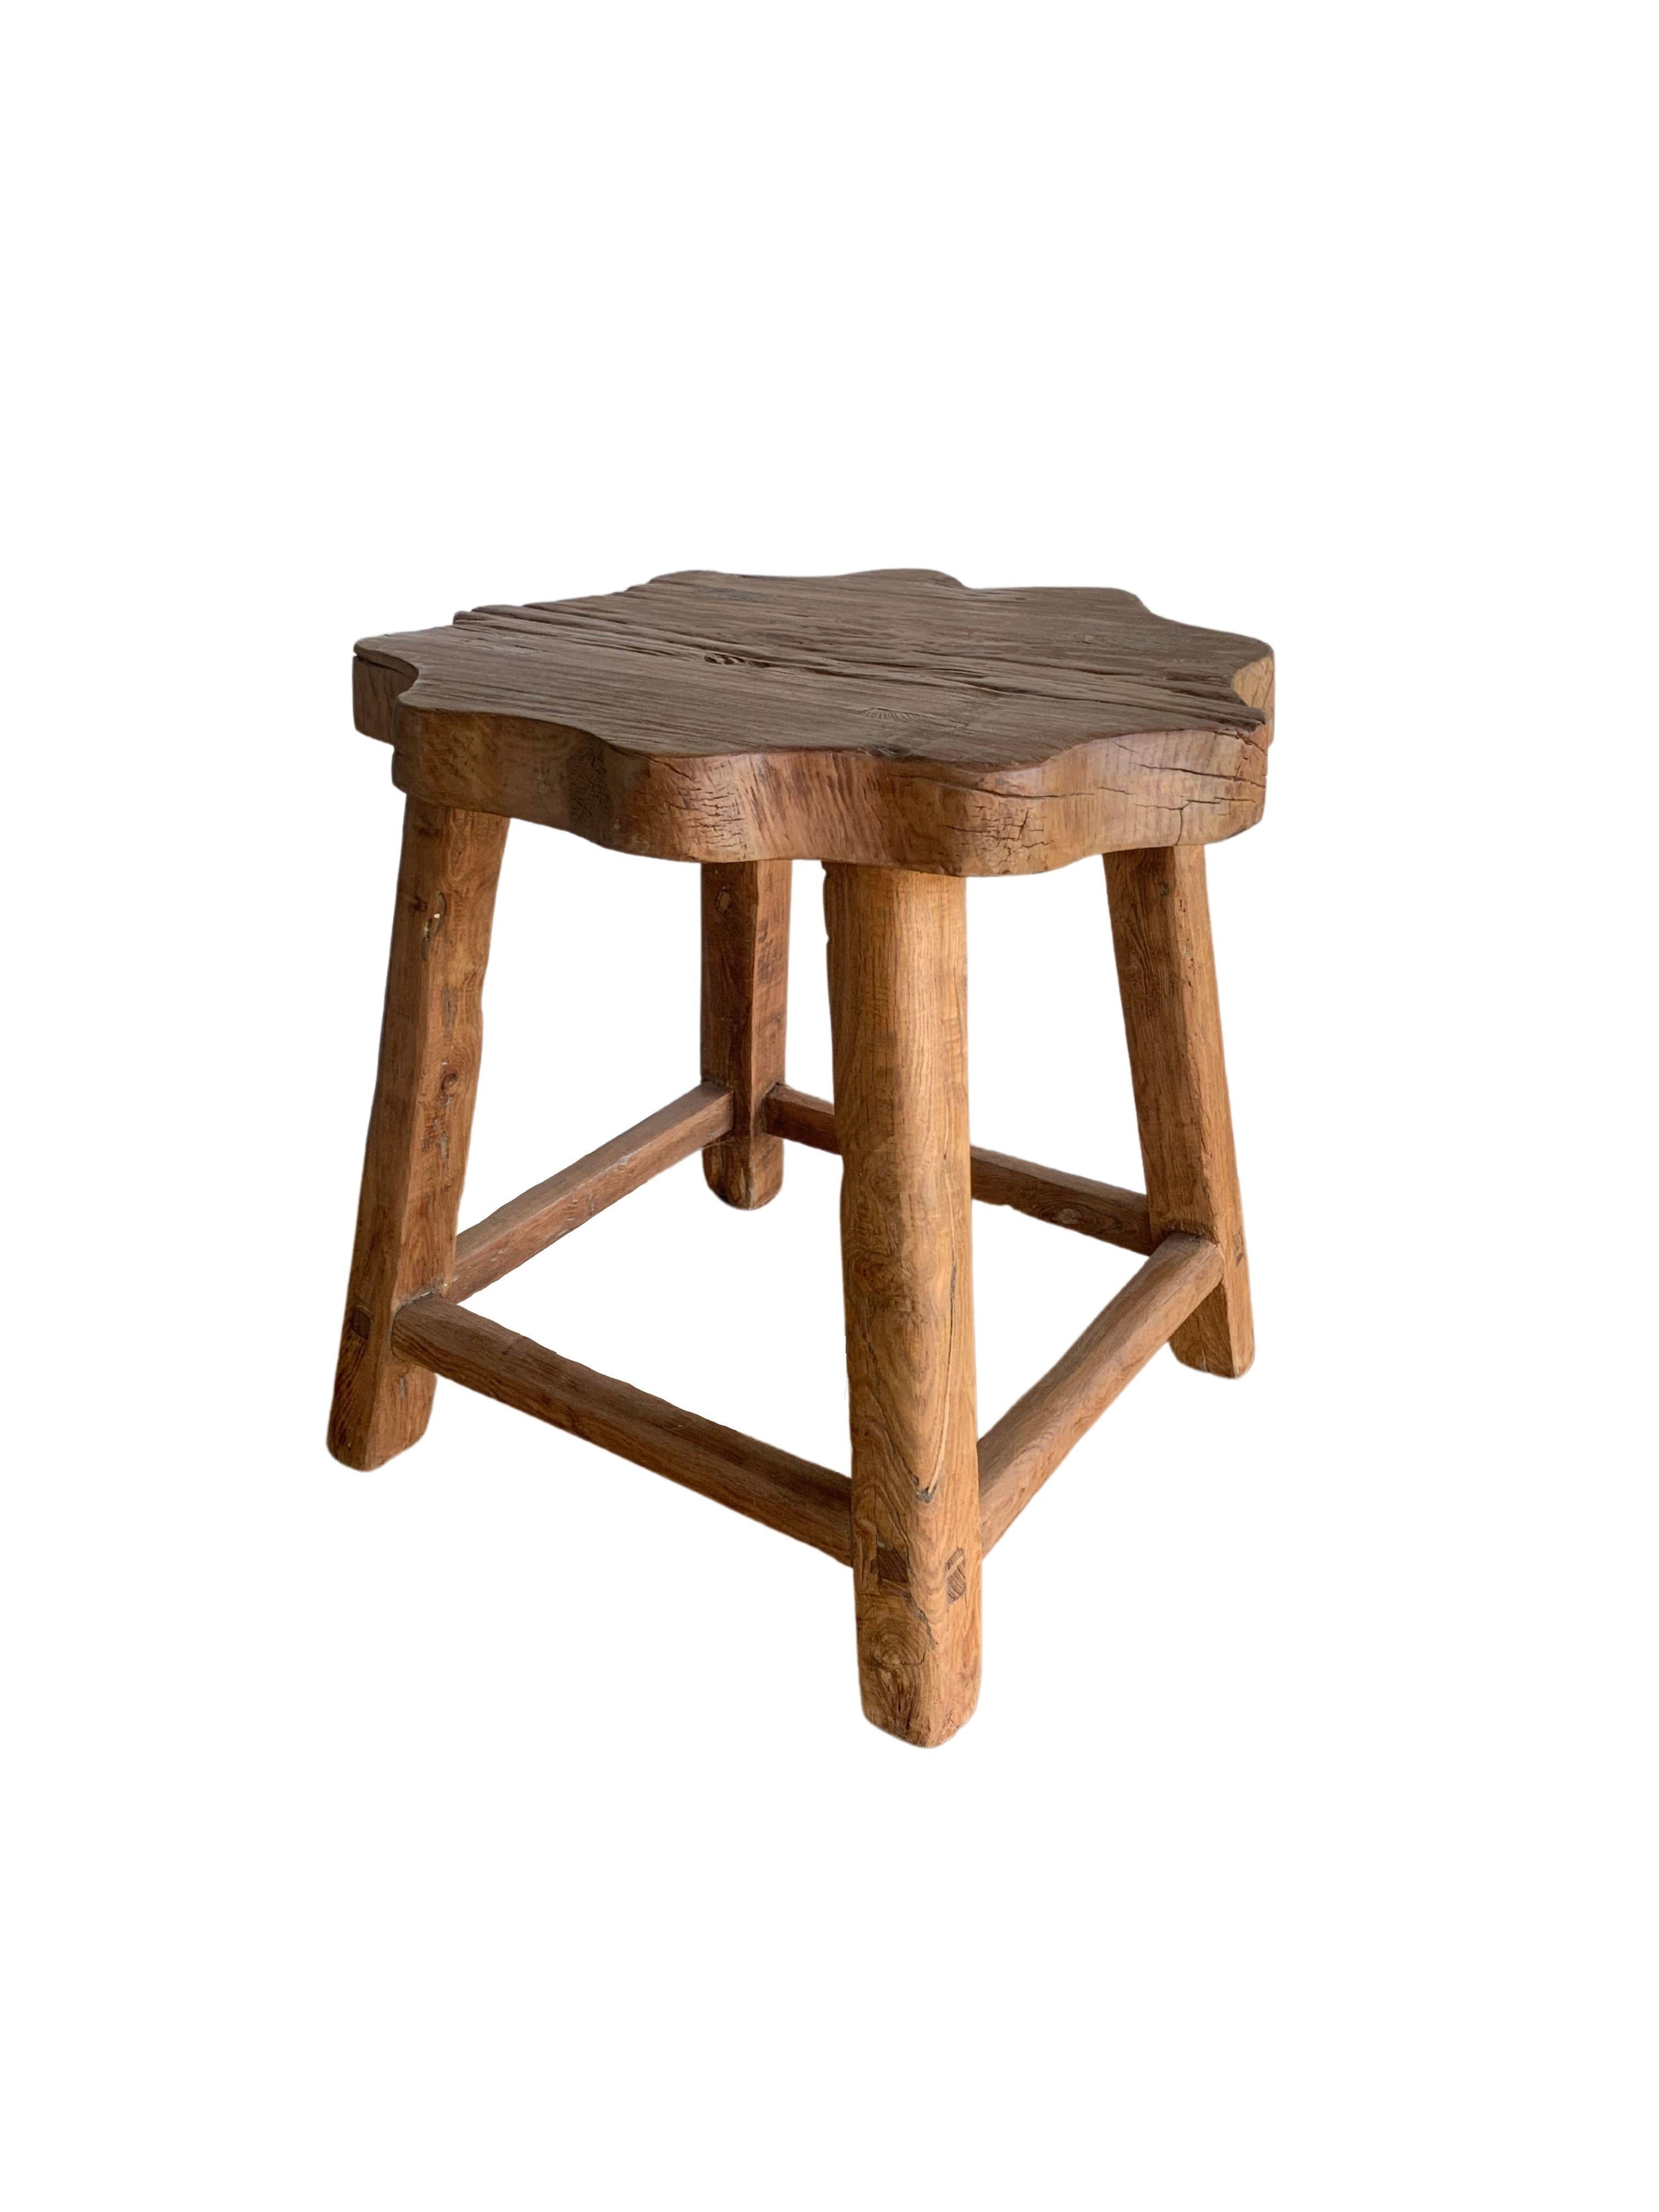 This elm wood stool comes from China's Hubei province. It was crafted using only wooden joints. The elm wood has a wonderful wood texture. A spacious seat with a floral shape and angular legs add to its charm.

Dimensions: Height 56cm x diameter